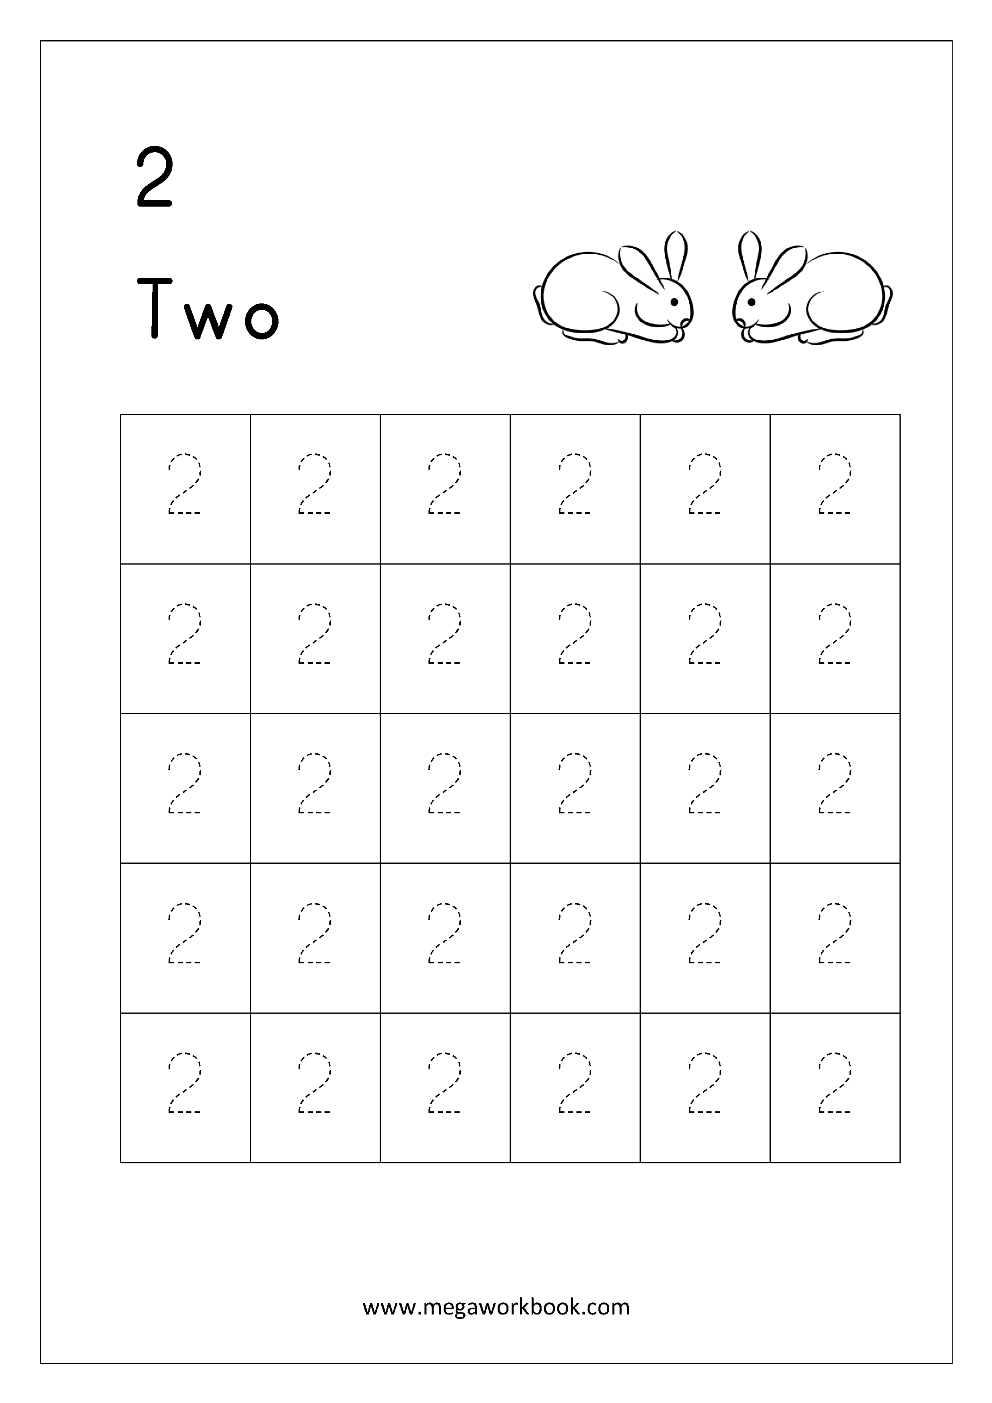 Number Tracing - Tracing Numbers - Number Tracing Worksheets intended for Letter 2 Tracing